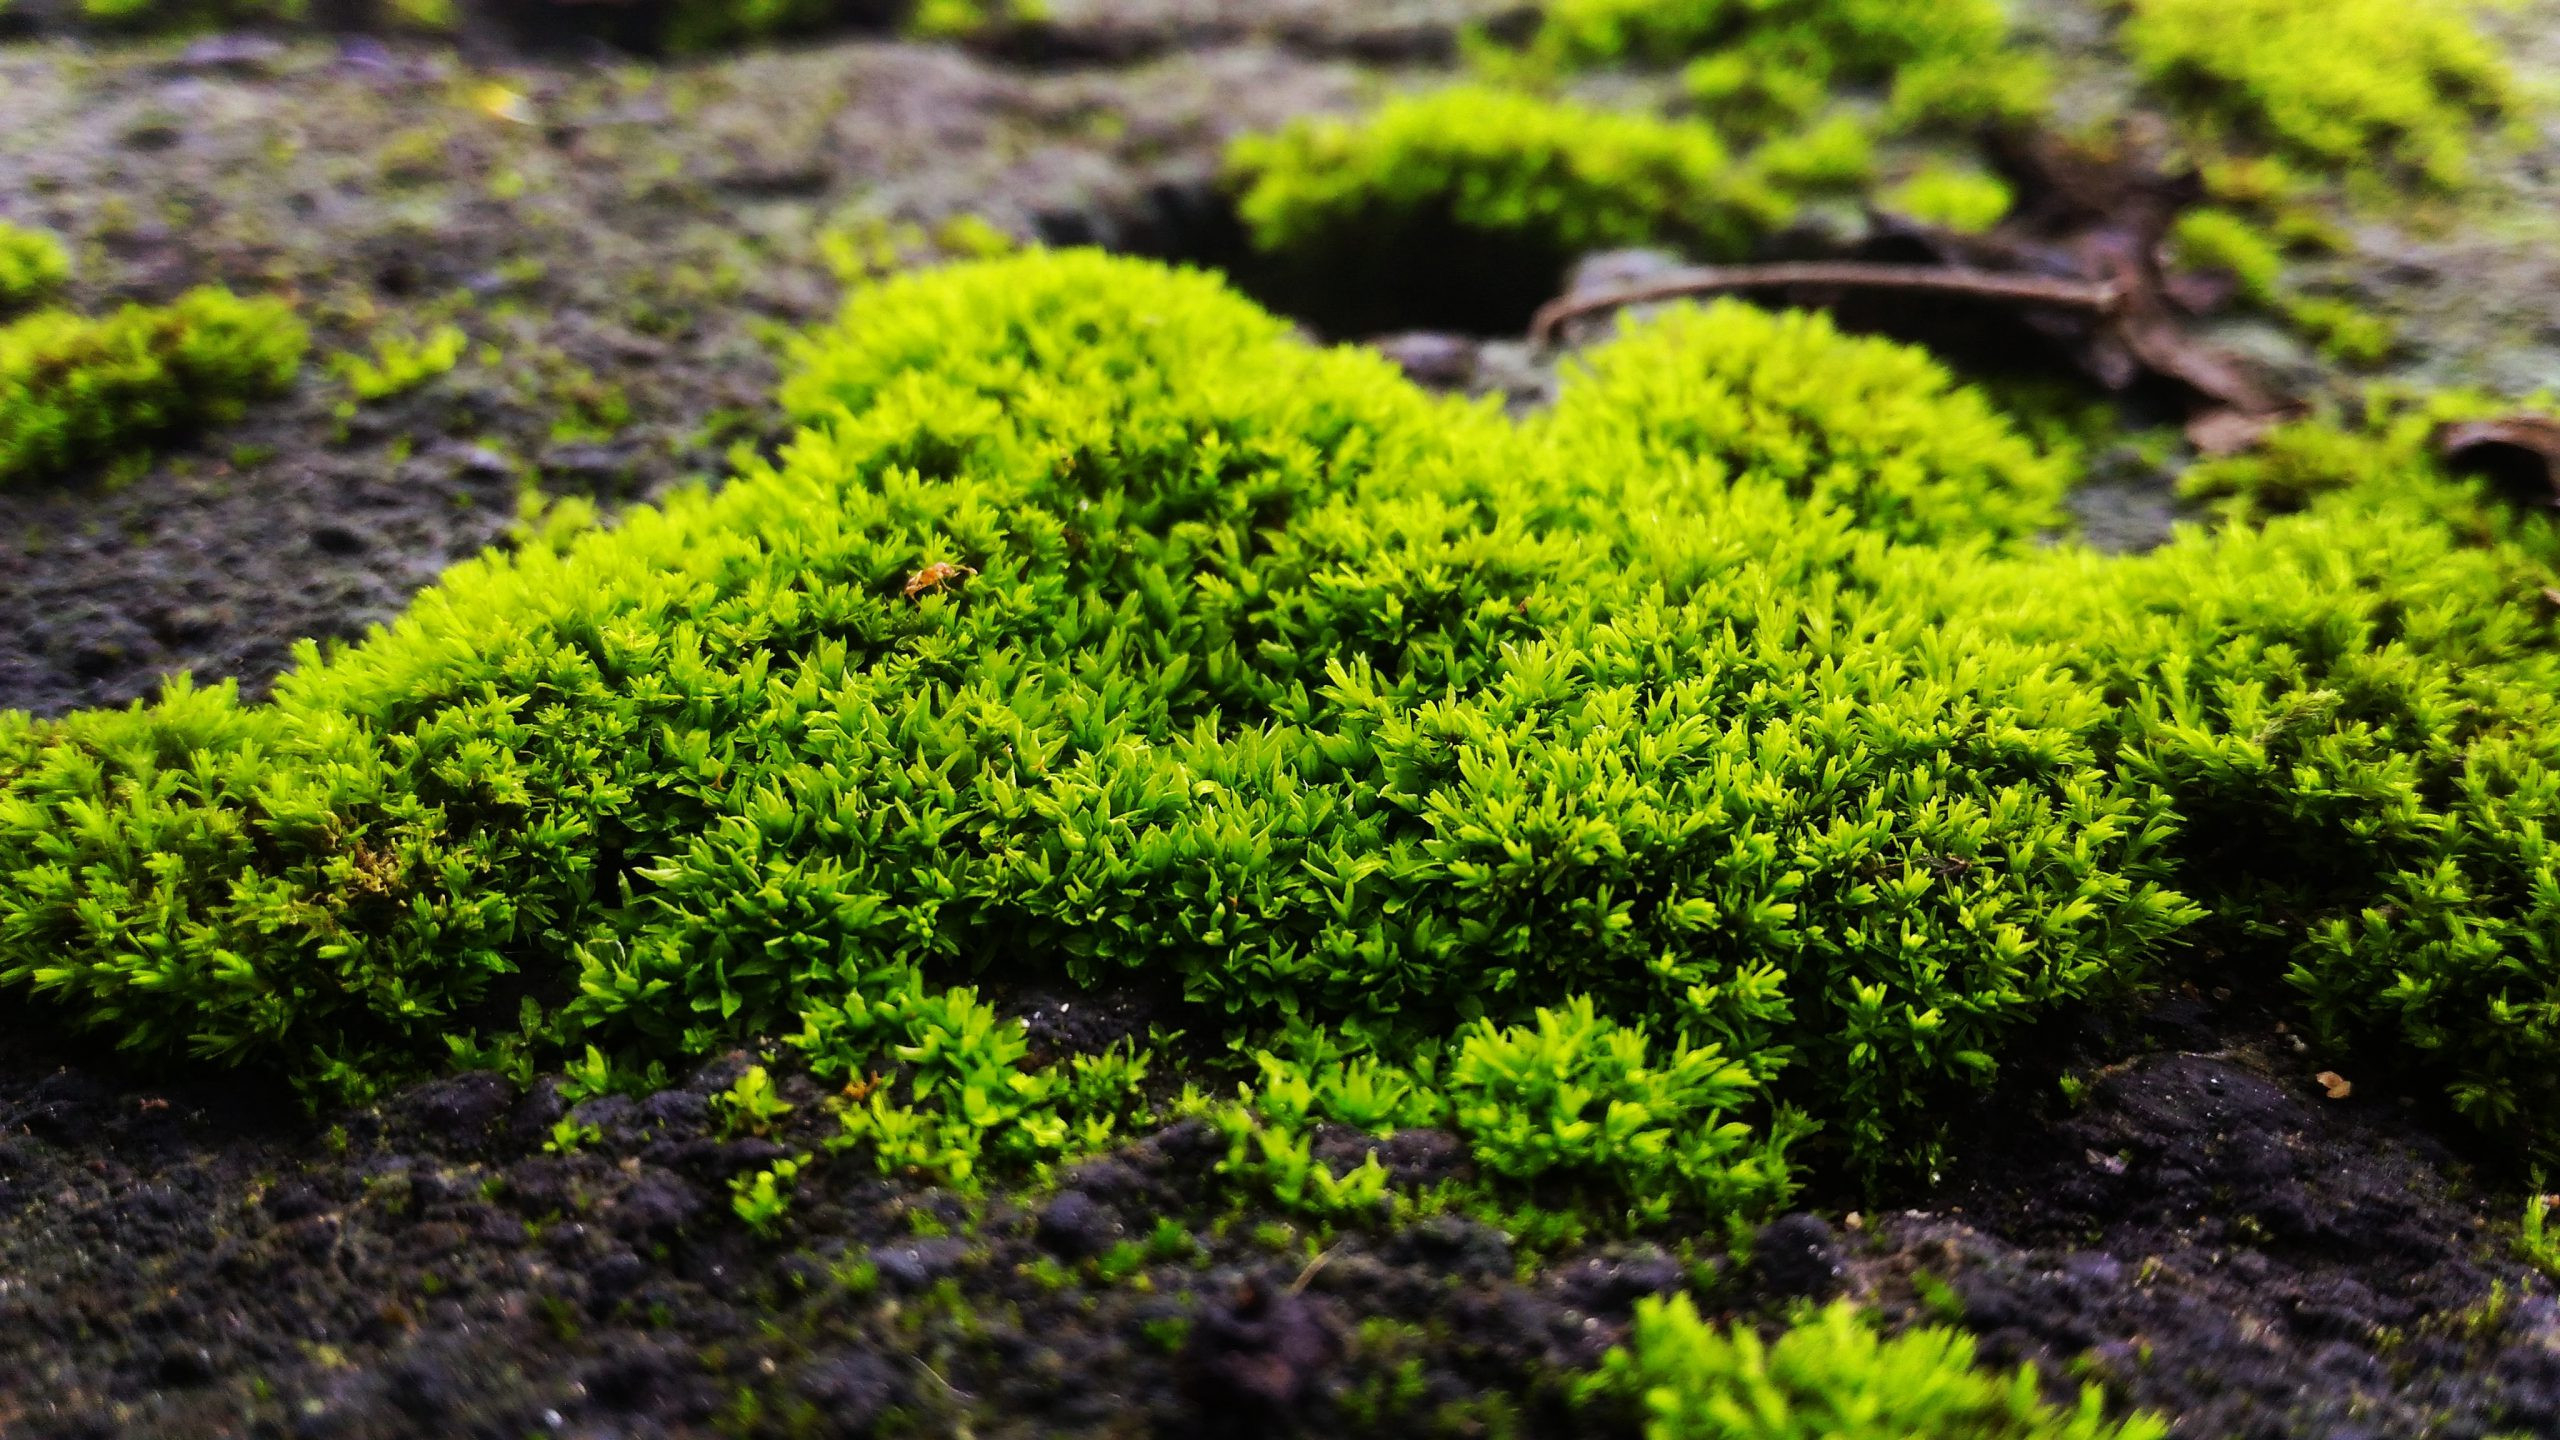 Peat Moss Vs. Sphagnum Moss: Are They The Same? – Plants Spark Joy